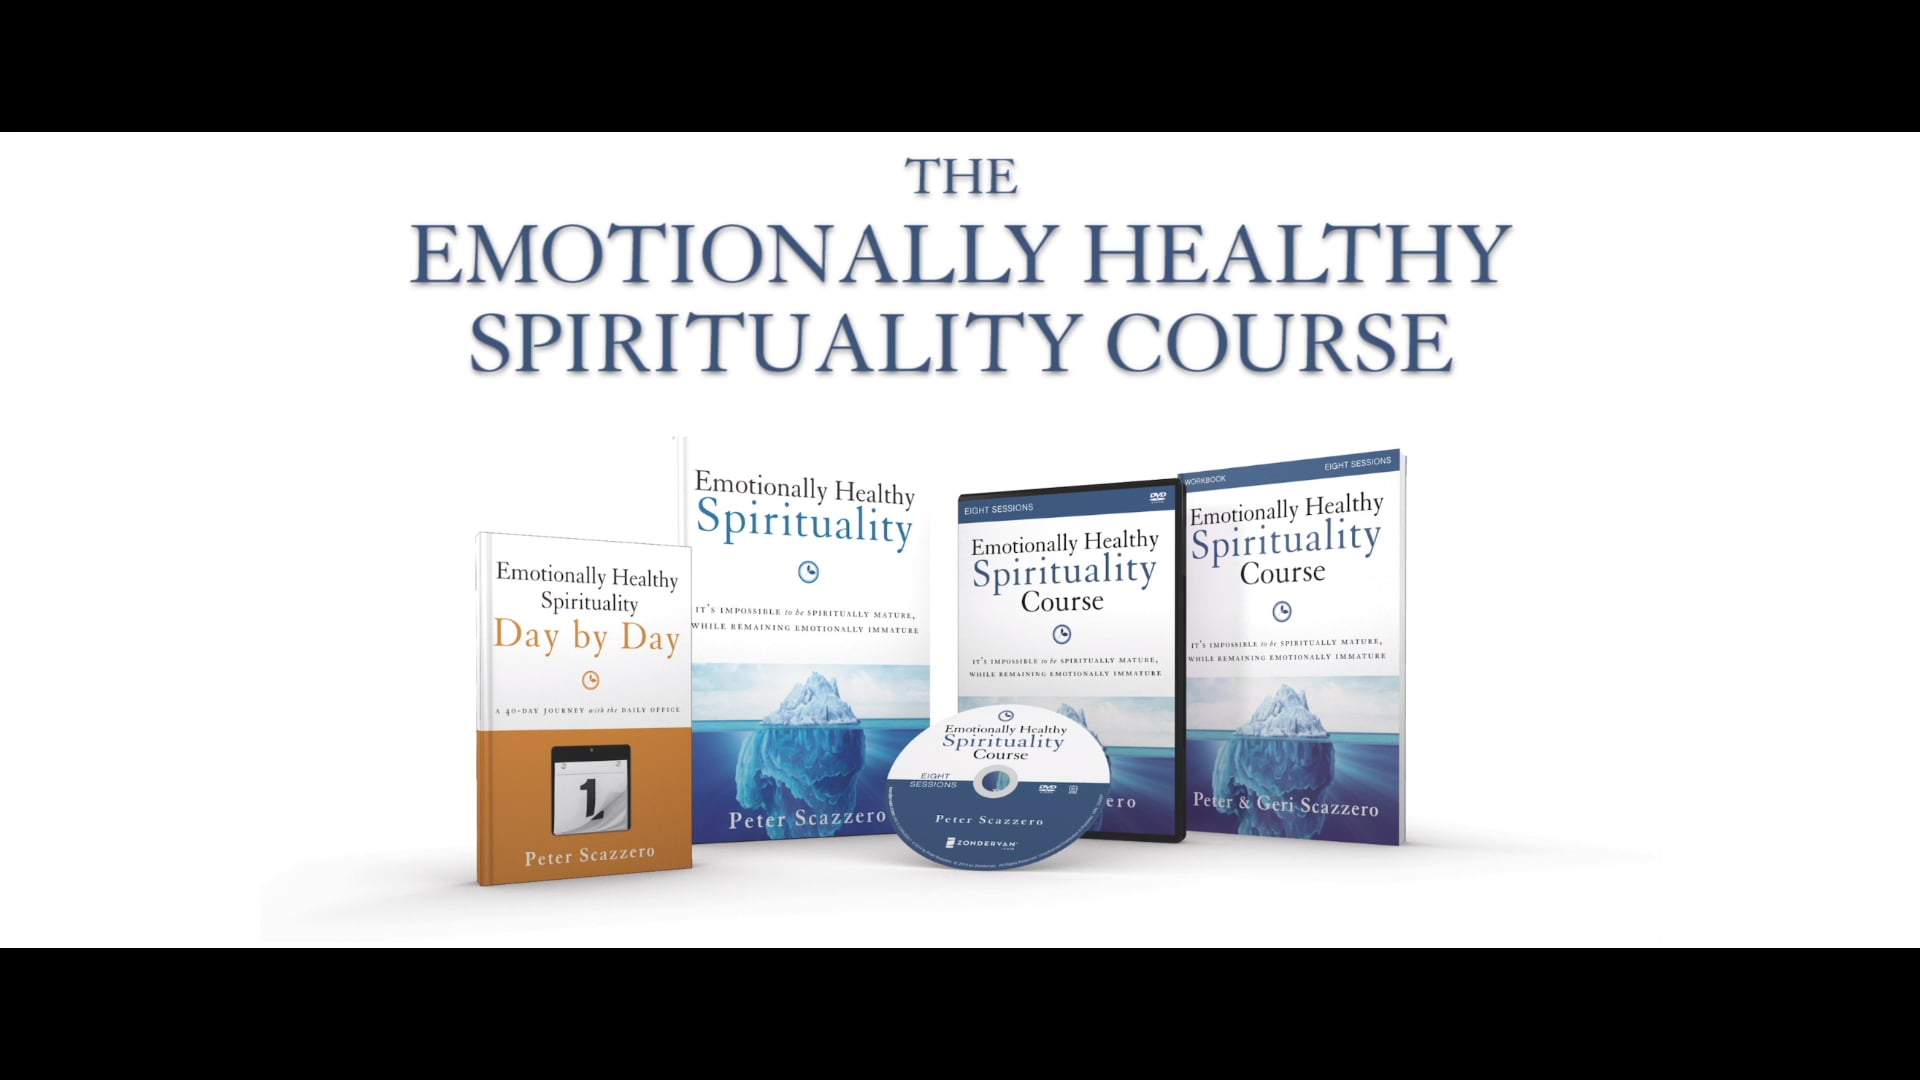 Expanded　Online　Edition　Vimeo　On　Watch　on　Vimeo　Emotionally　Spirituality　Healthy　Demand